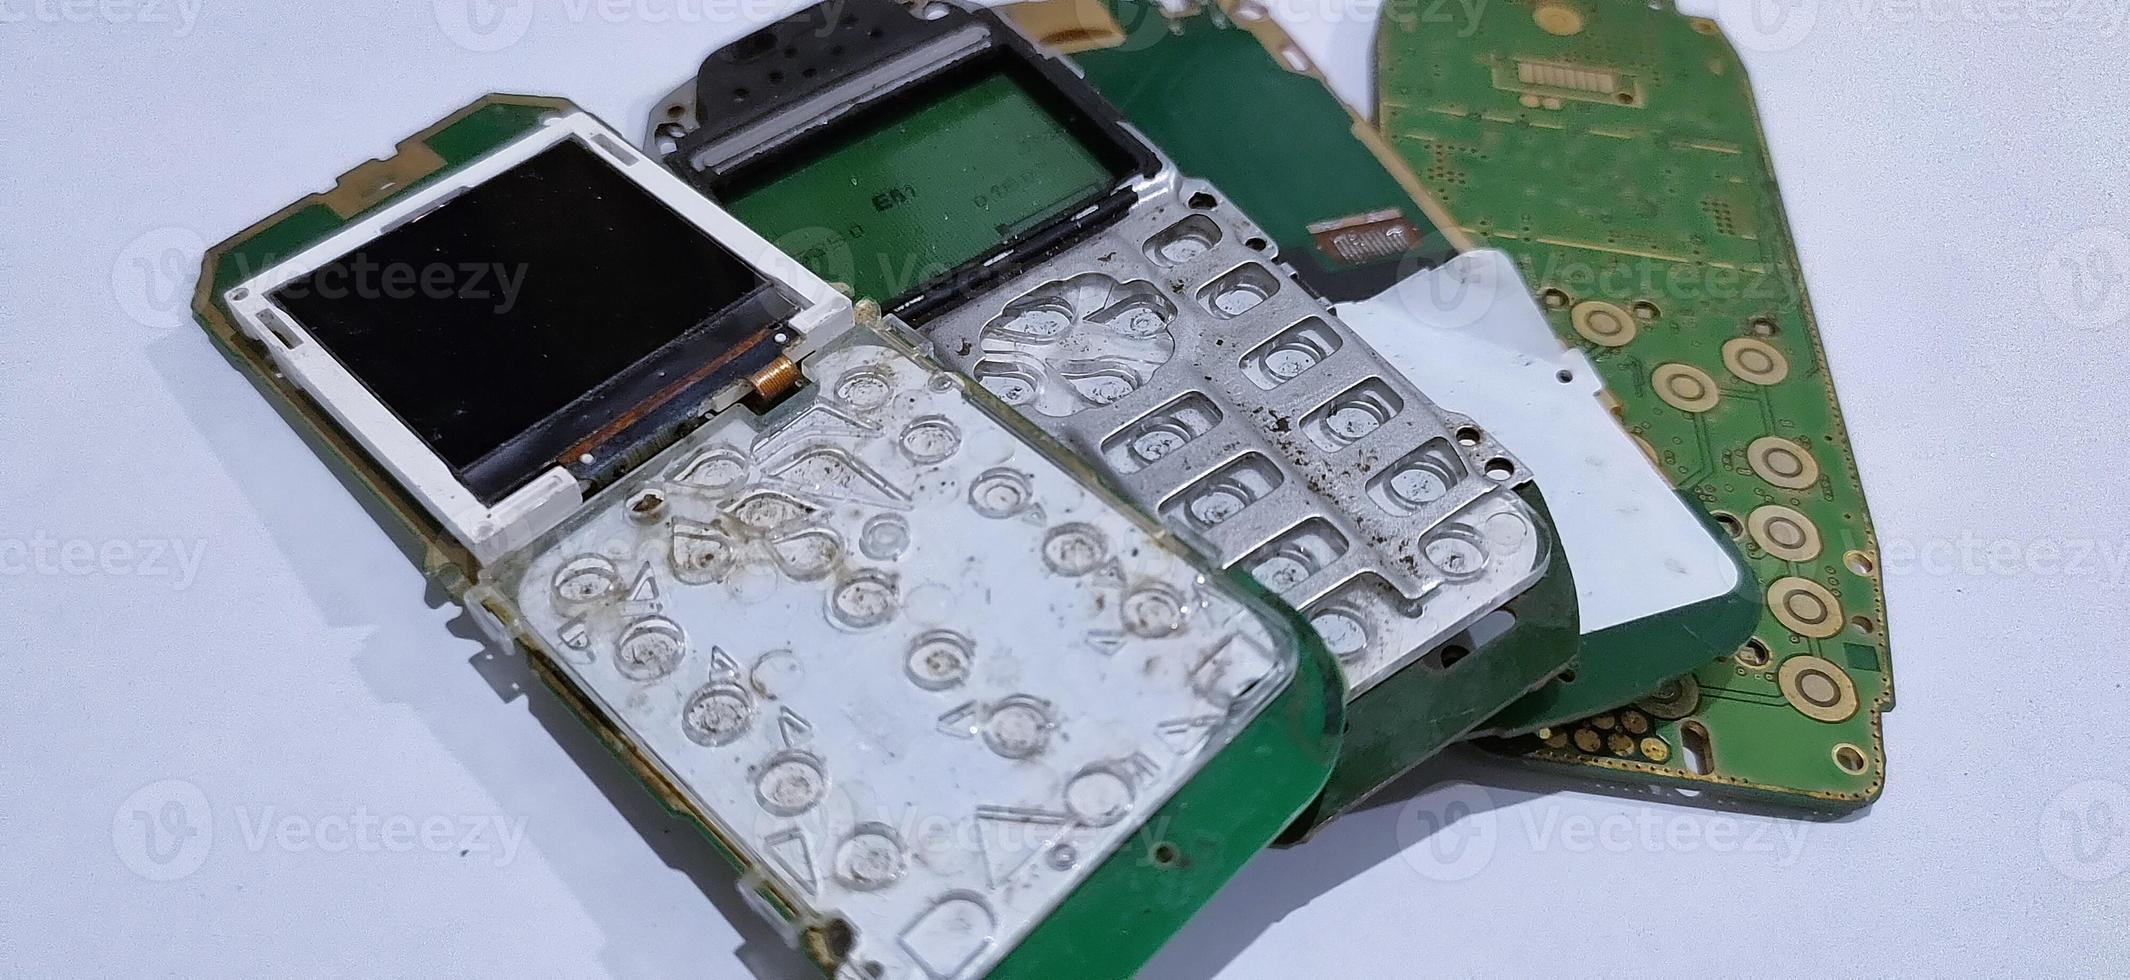 The damaged circuit board pile cellular is an older model photo